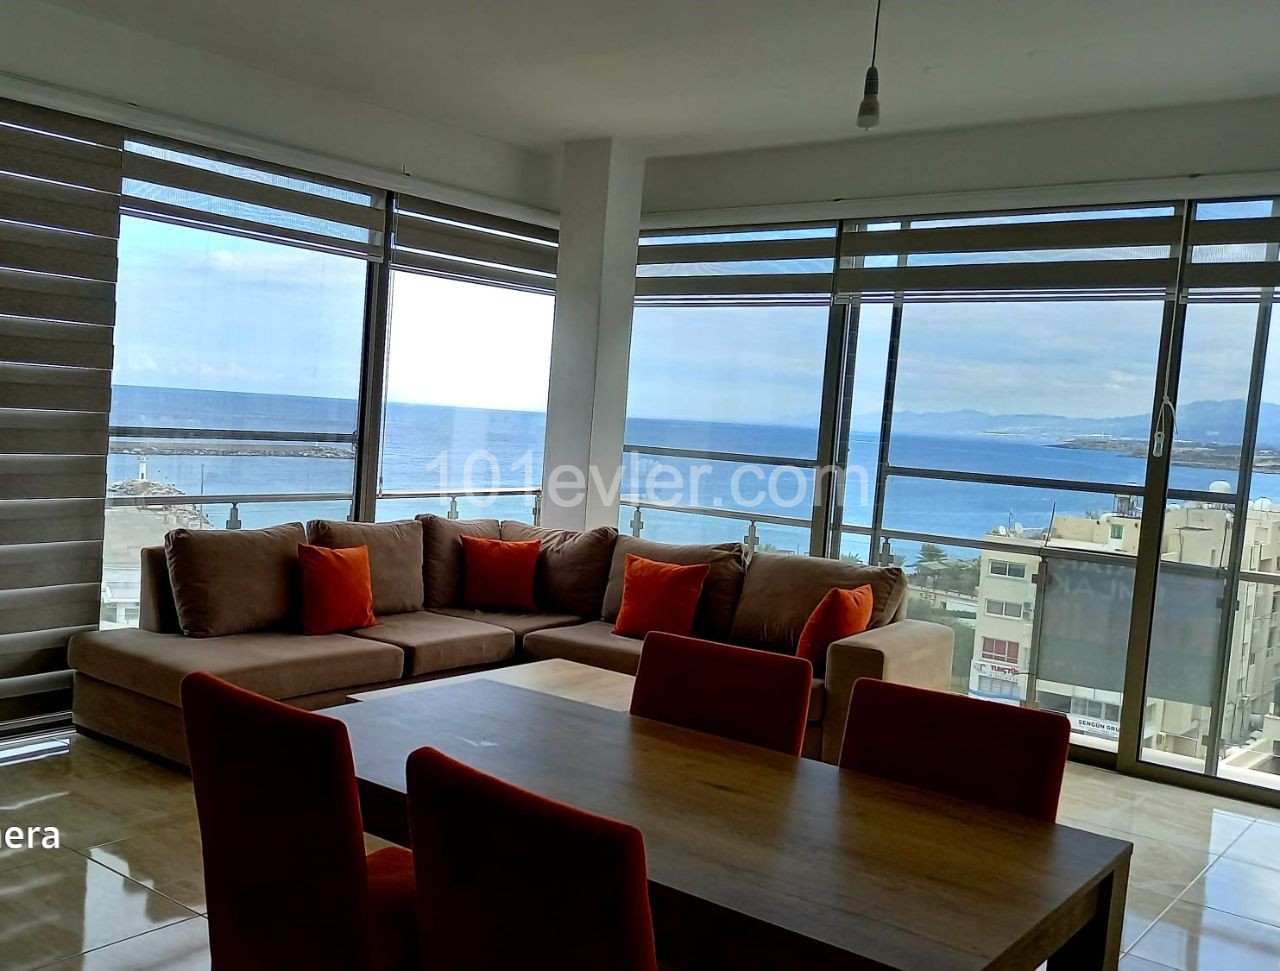 Kyrenia- 2-bedroom apartment with sea-mountain -city view in the New Port area / Lordpalace hotel / front door **  ** 